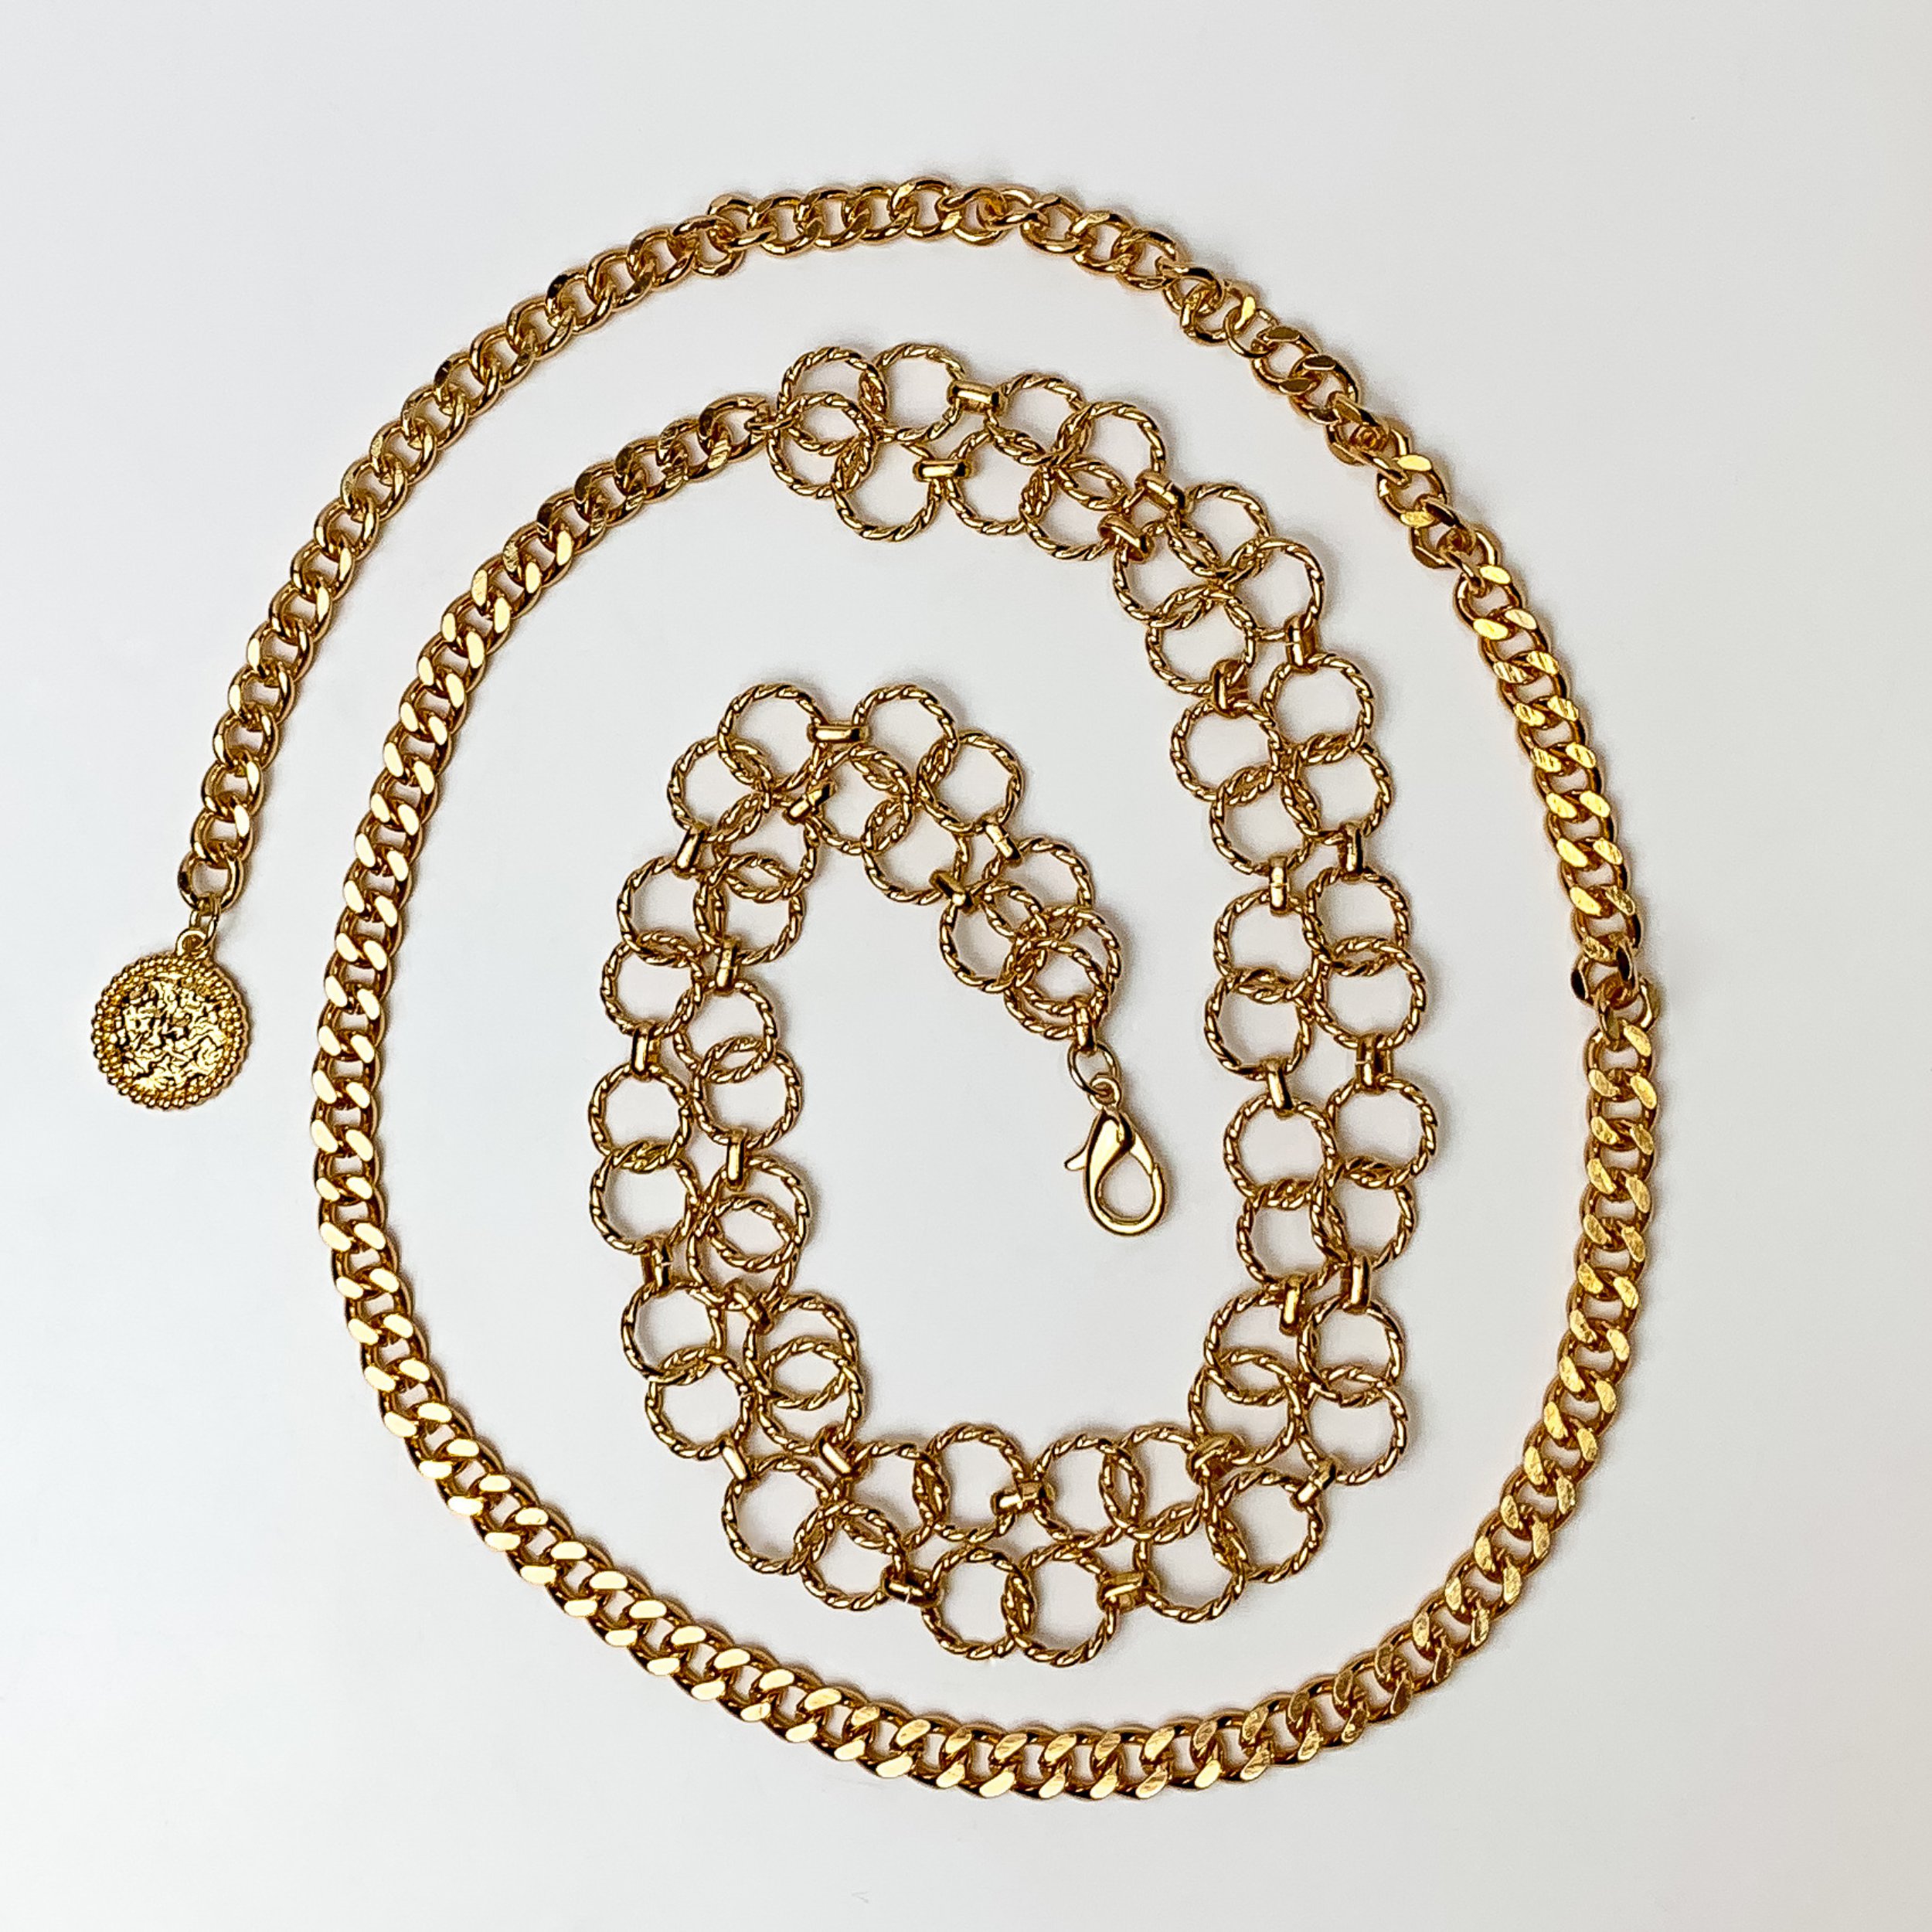 This Gorgeous Double Chain Gold Tone Belt is pictured on a white background.